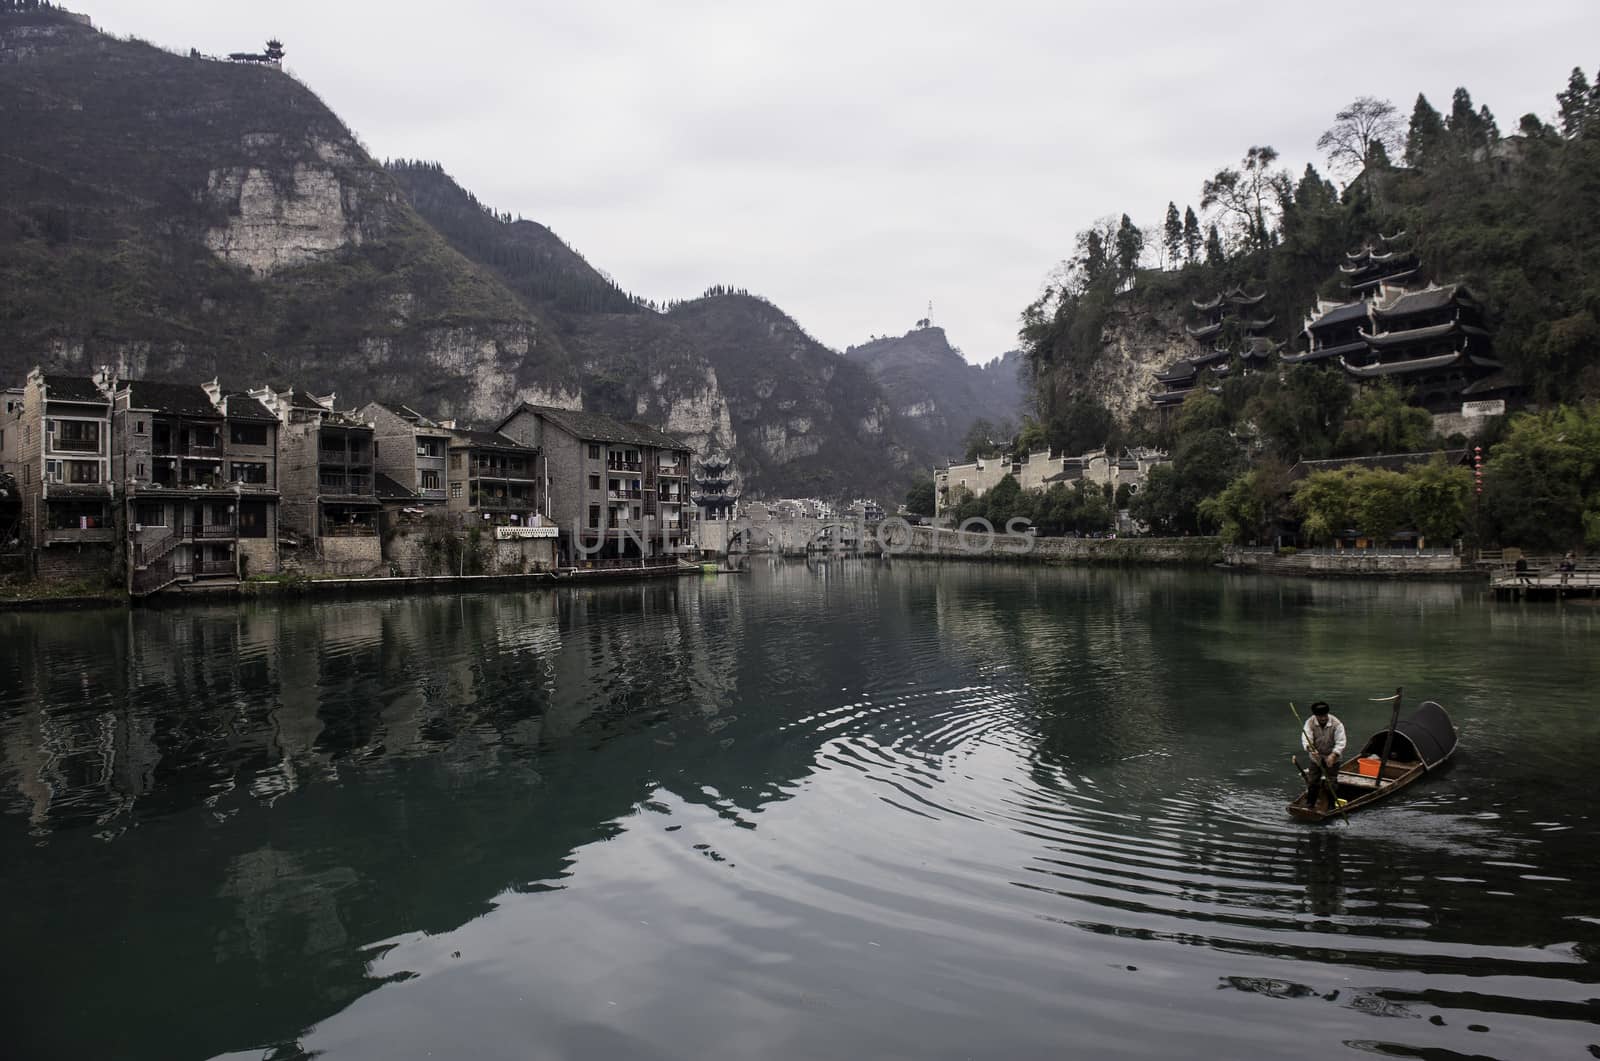 The ancient town of Zhenyuan in Guizhou province.